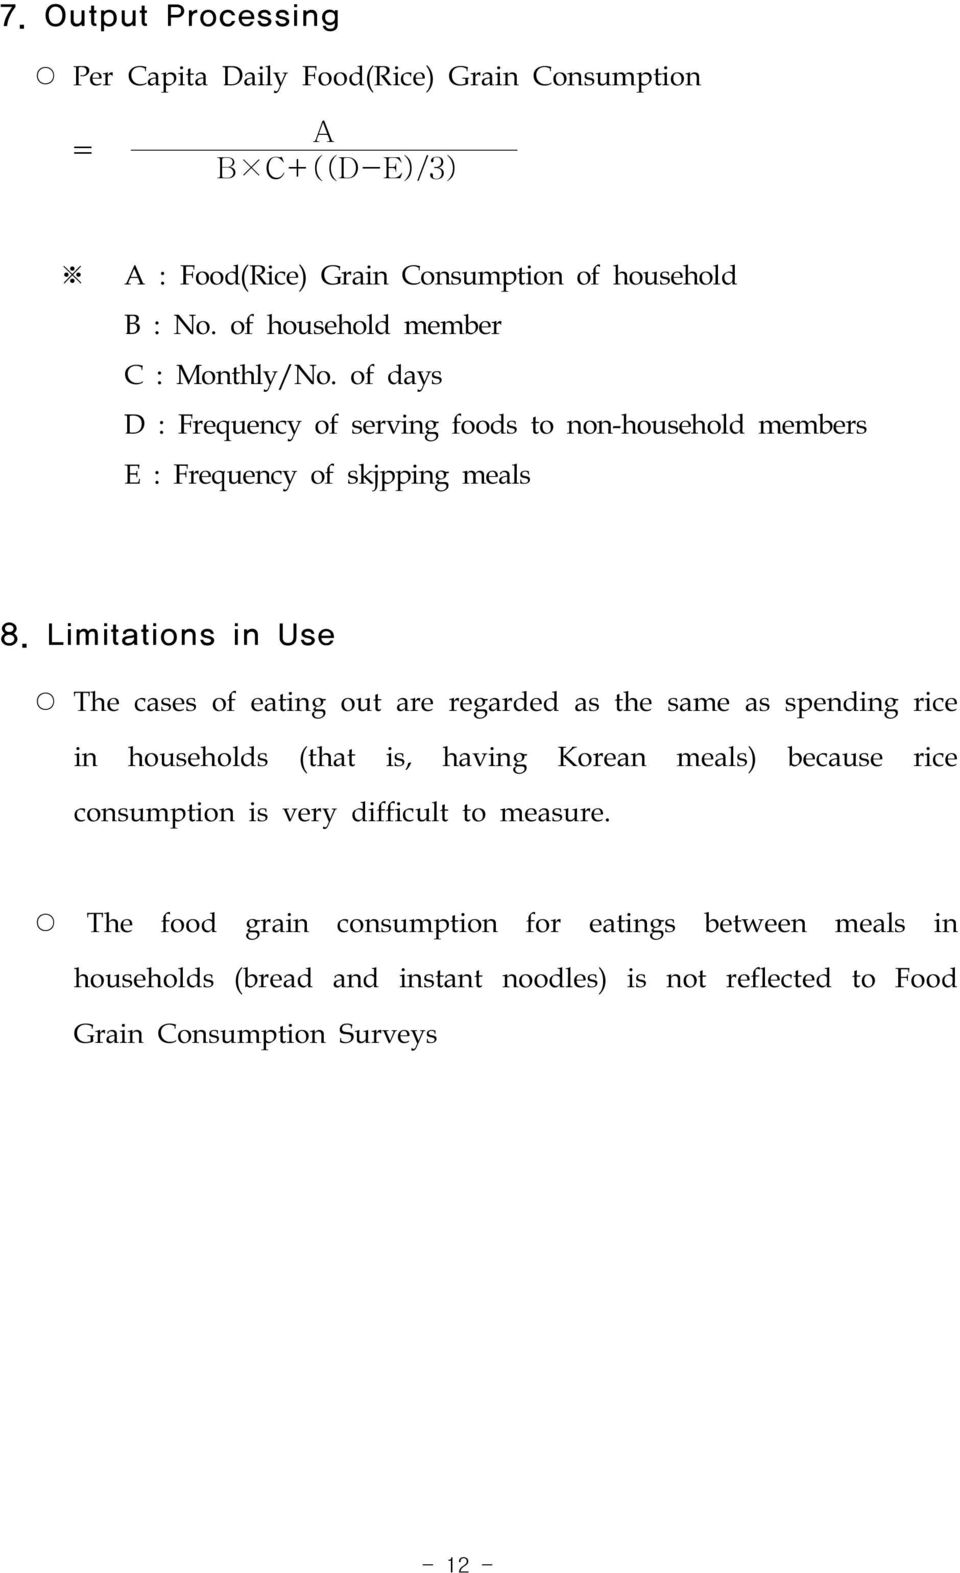 Limitations in Use The cases of eating out are regarded as the same as spending rice in households (that is, having Korean meals) because rice